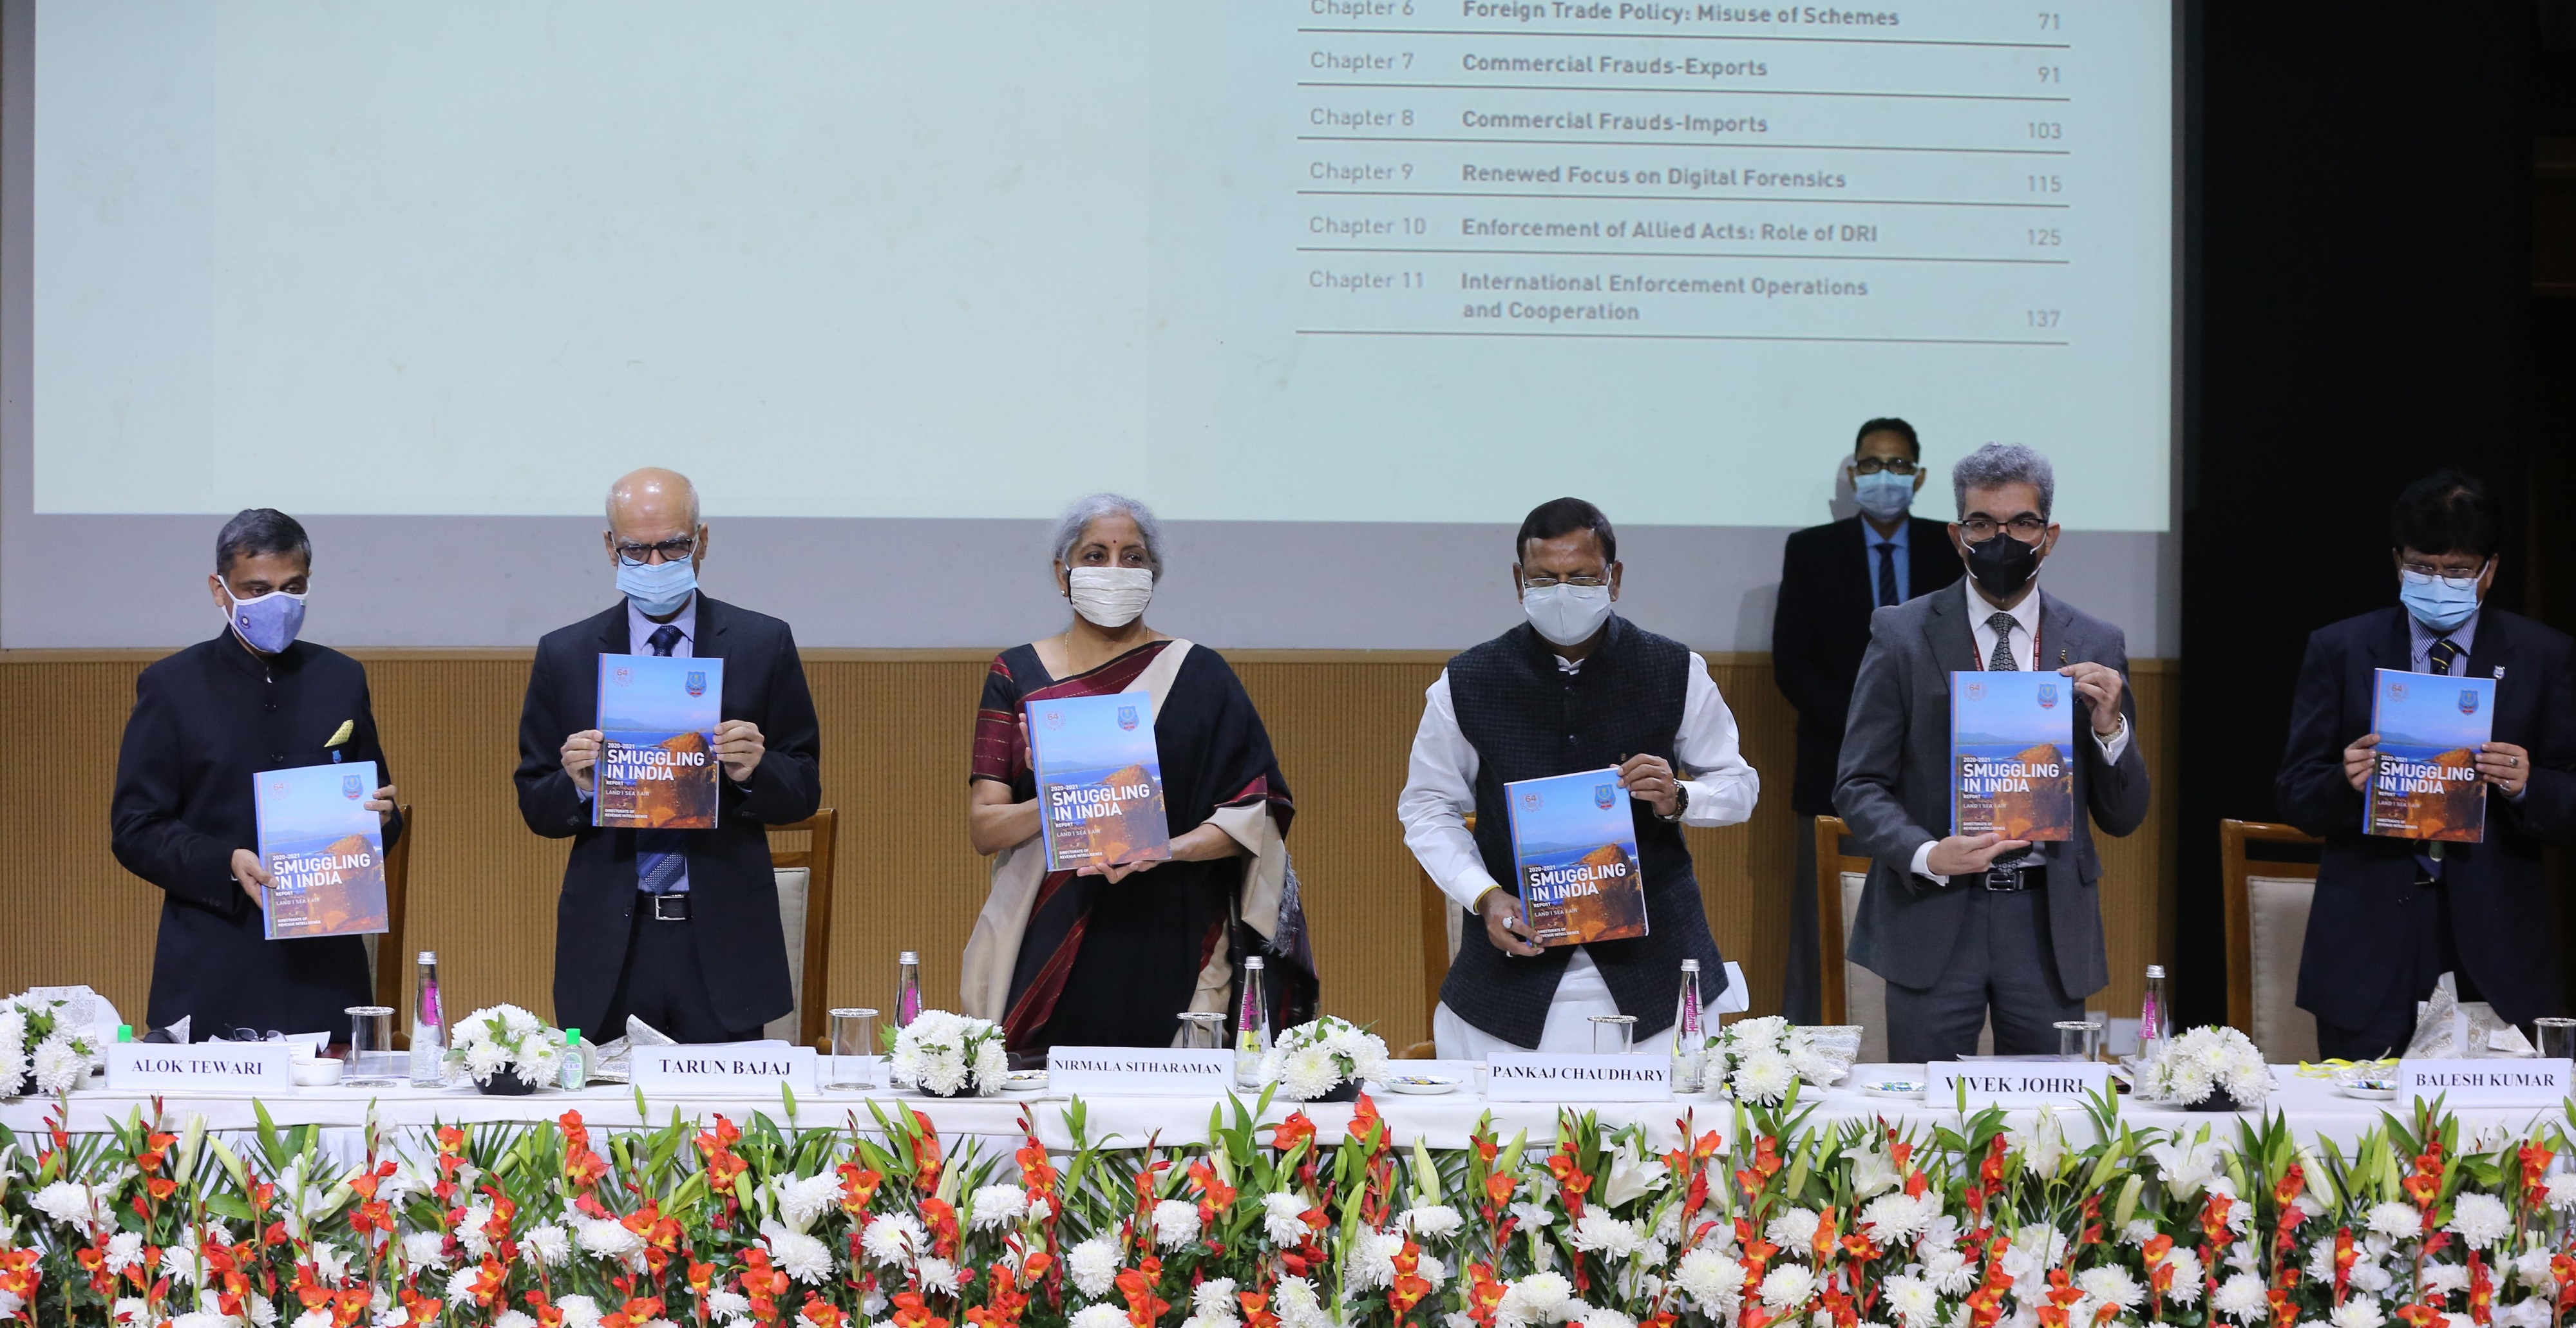 The DRI’s ‘Smuggling in India Report- 2020-2021’ was released by the Hon’ble Union Finance Minister.